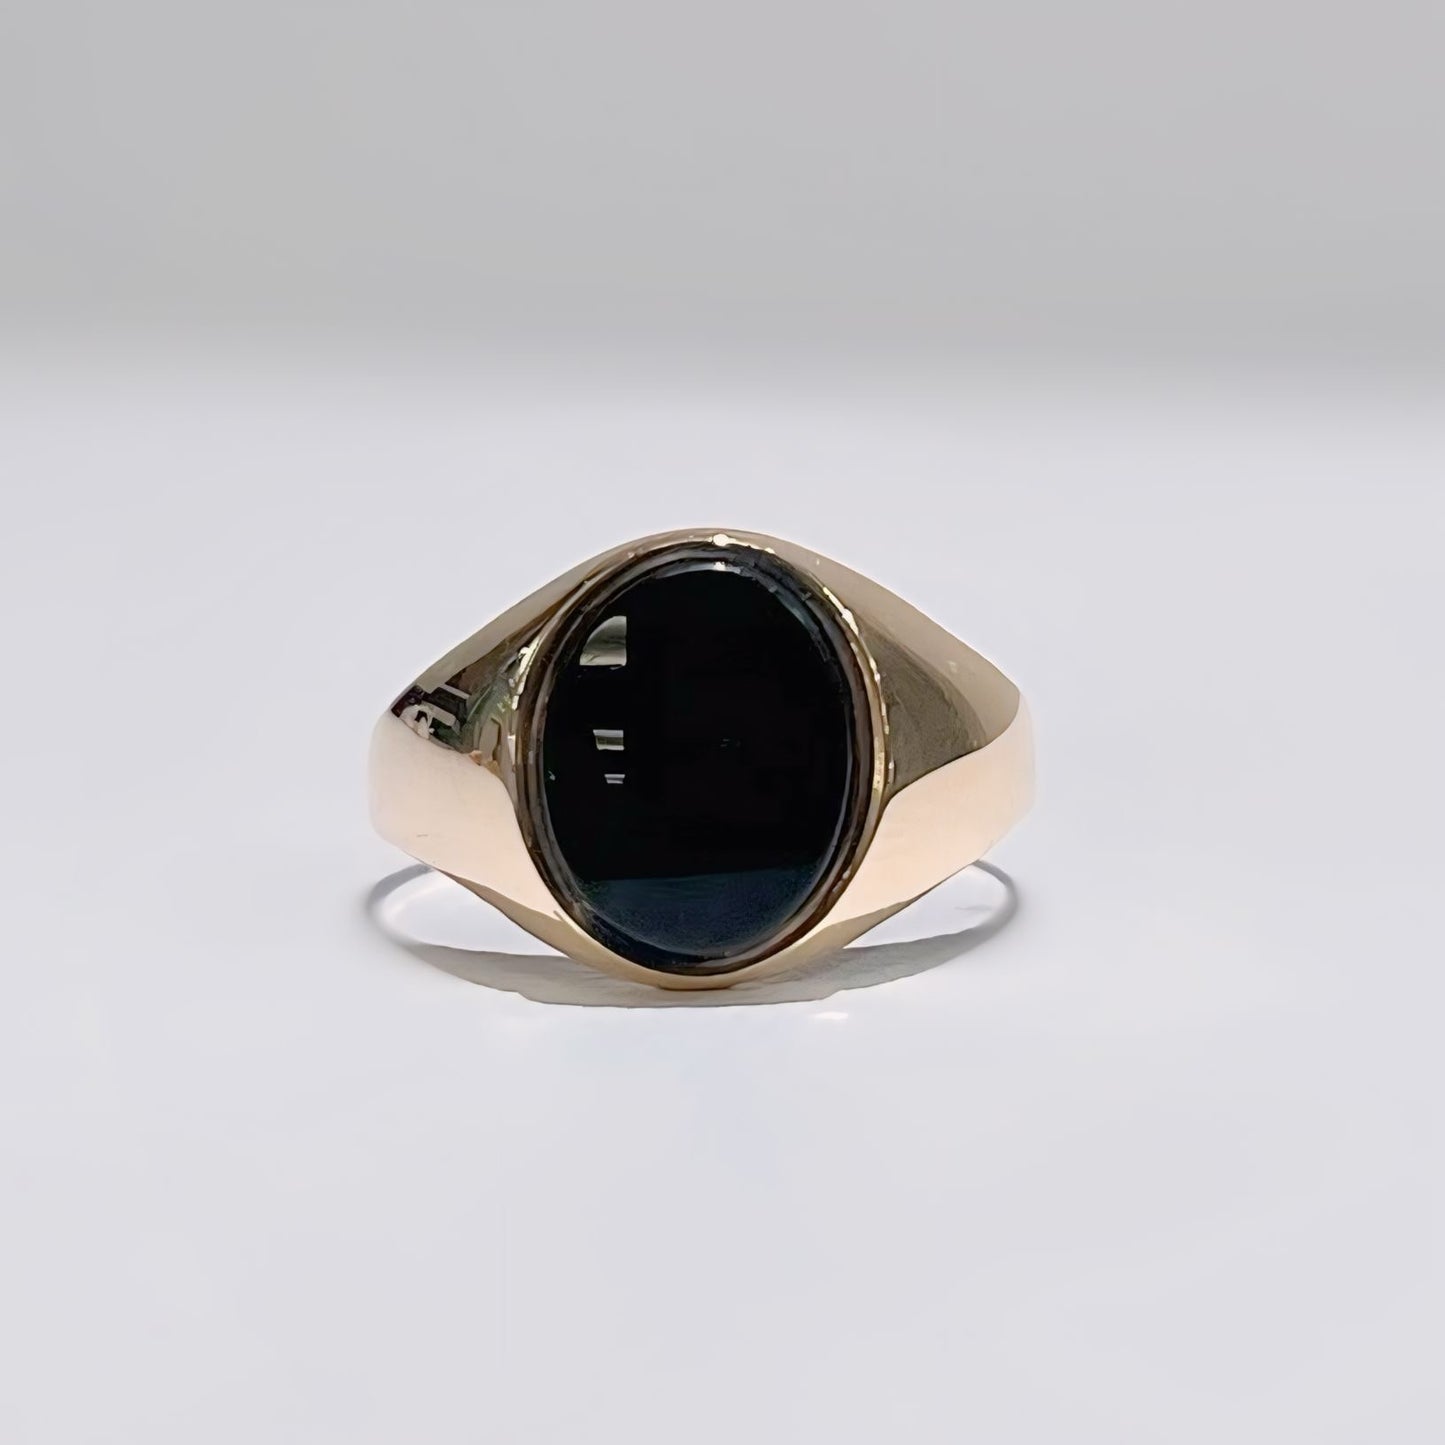 Vintage 9ct Yellow Gold Oval Onyx Signet Ring - Size L